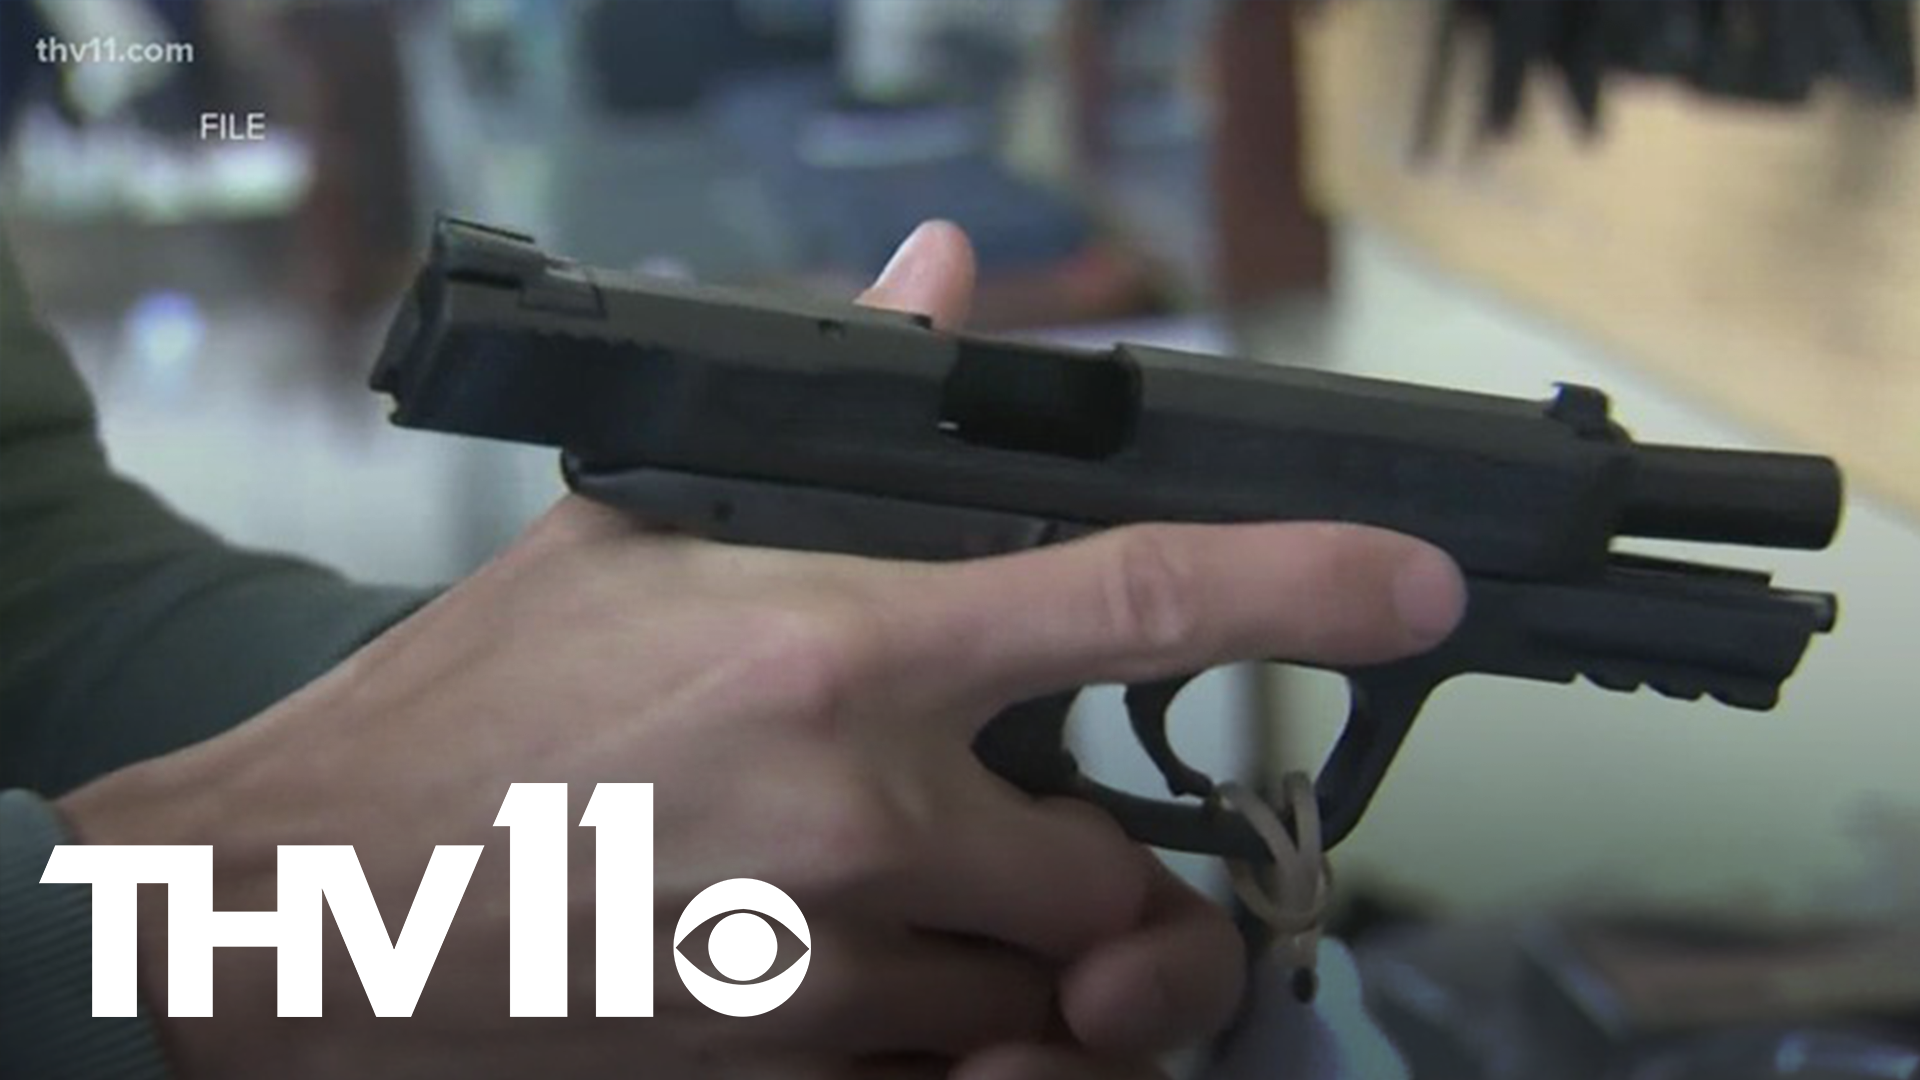 The Arkansas General Assembly has wrapped up its regular business for this legislative session. That comes after the Senate passed a new gun rights bill.